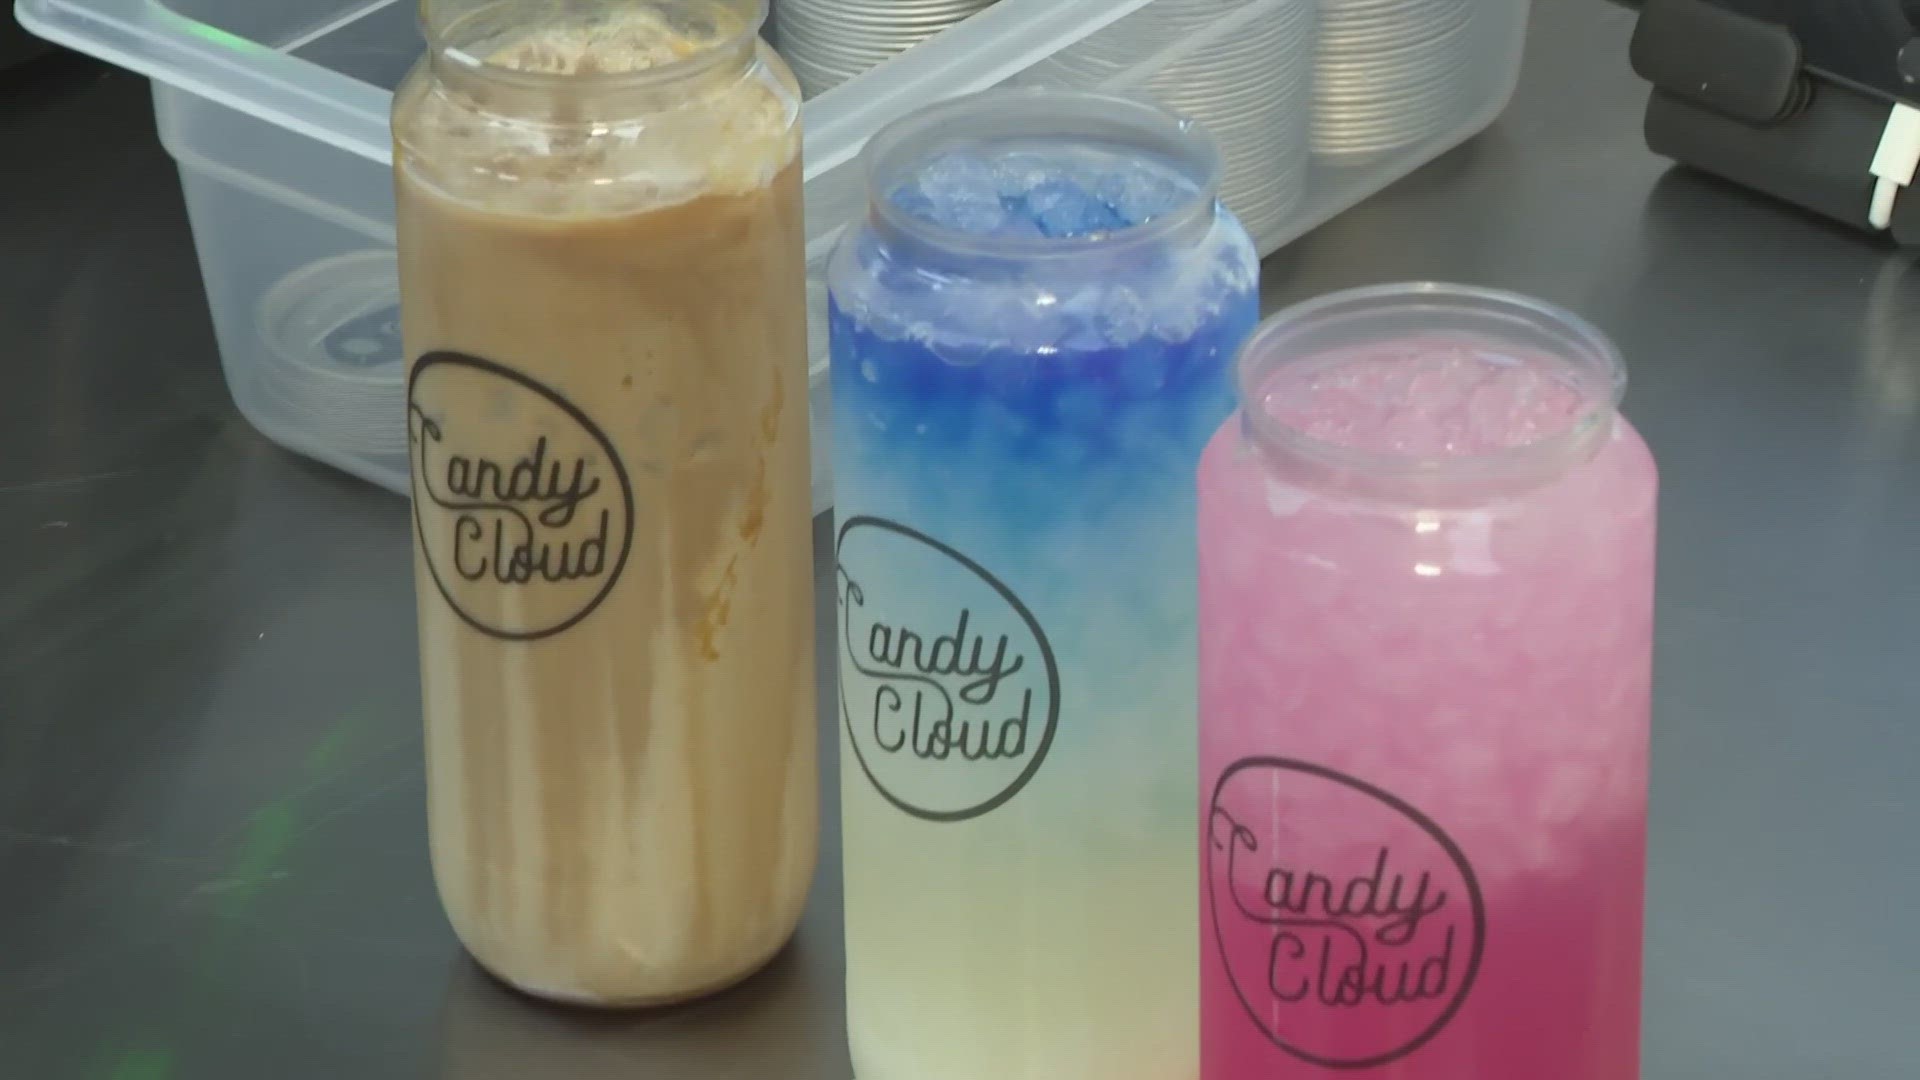 Specialty canned-to-order drinks shop Candy Cloud has opened its first Ohio location at 36299 Euclid Ave. in Willoughby. 3News' Kierra Cotton reports.